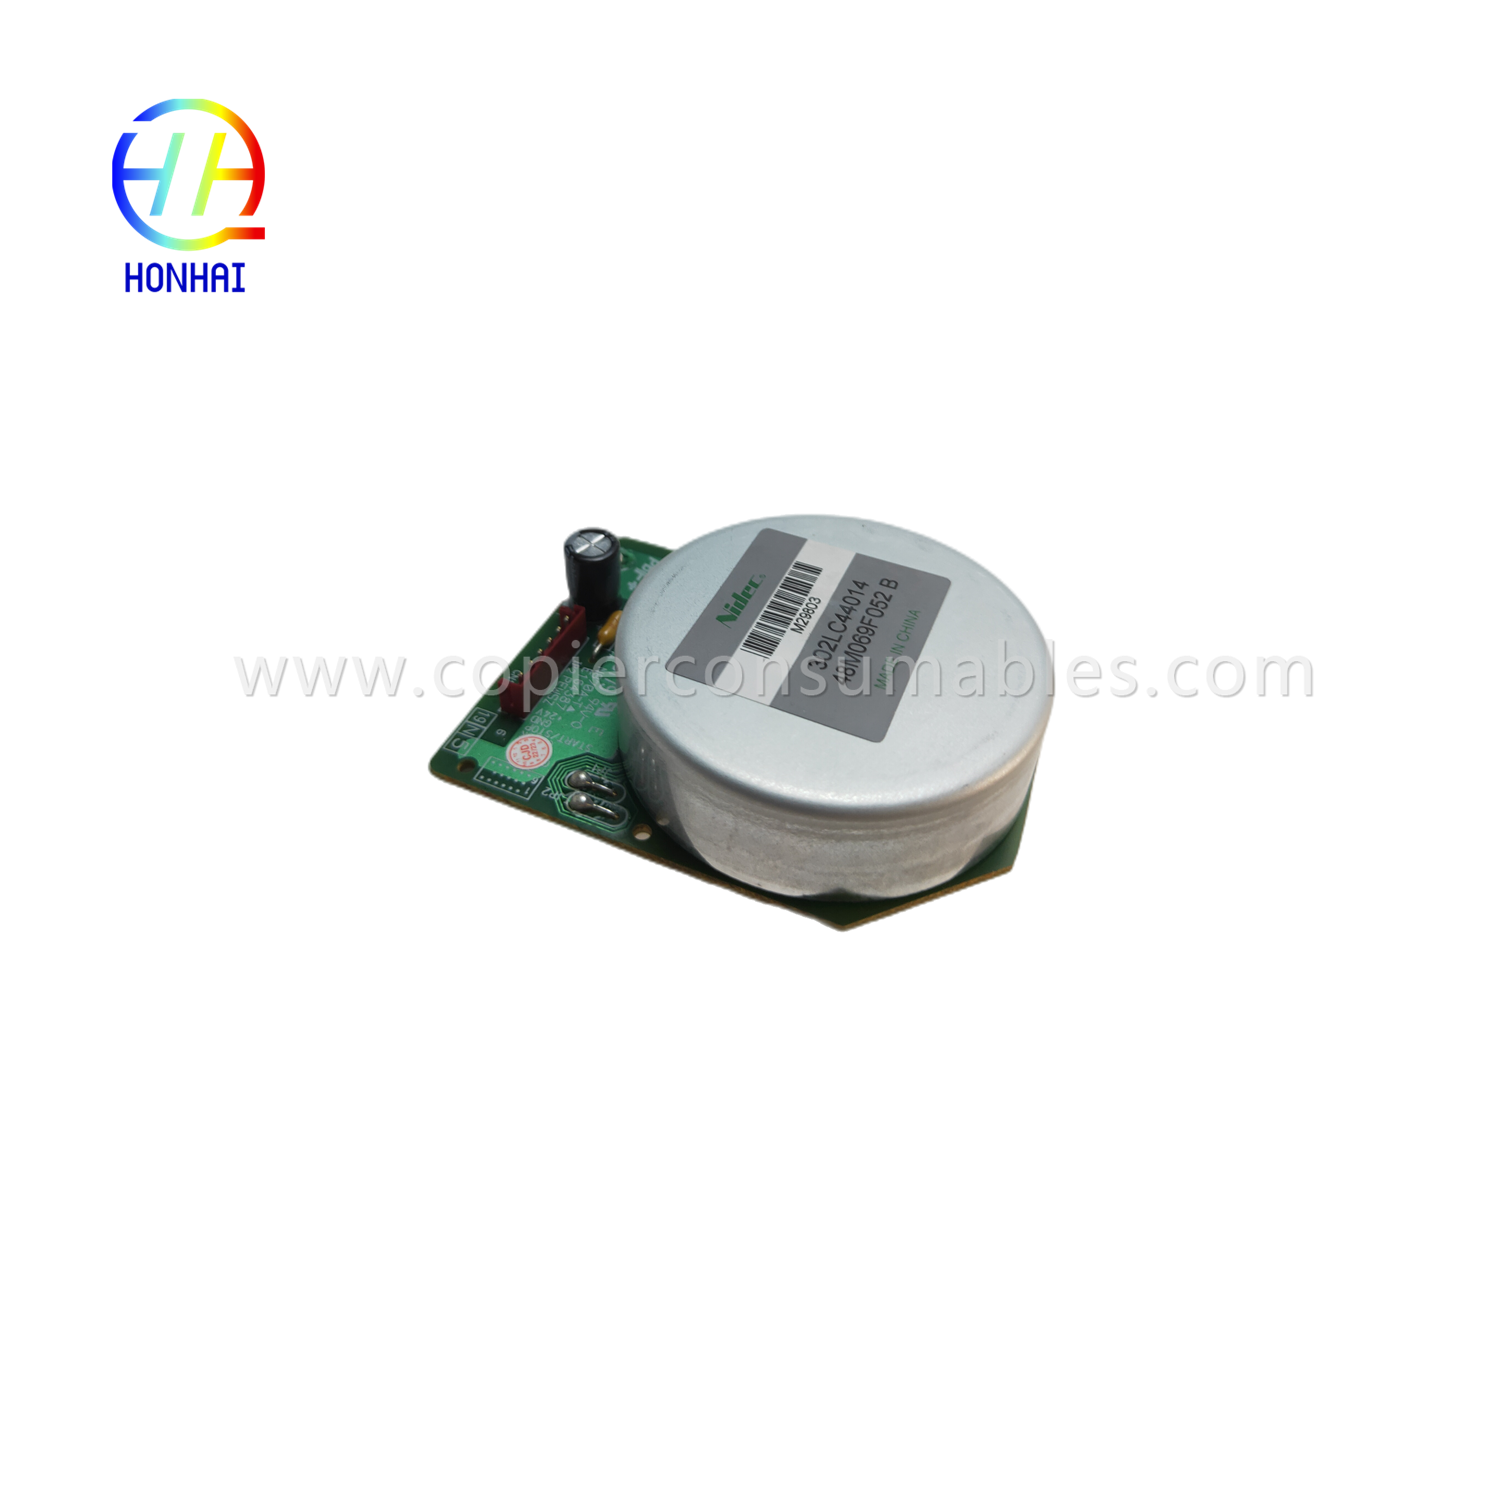 https://www.copierconsumables.com/motor-voor-kyocera-ecosys-serie-parts-nr-302lc44014-48m069f052-b-product/